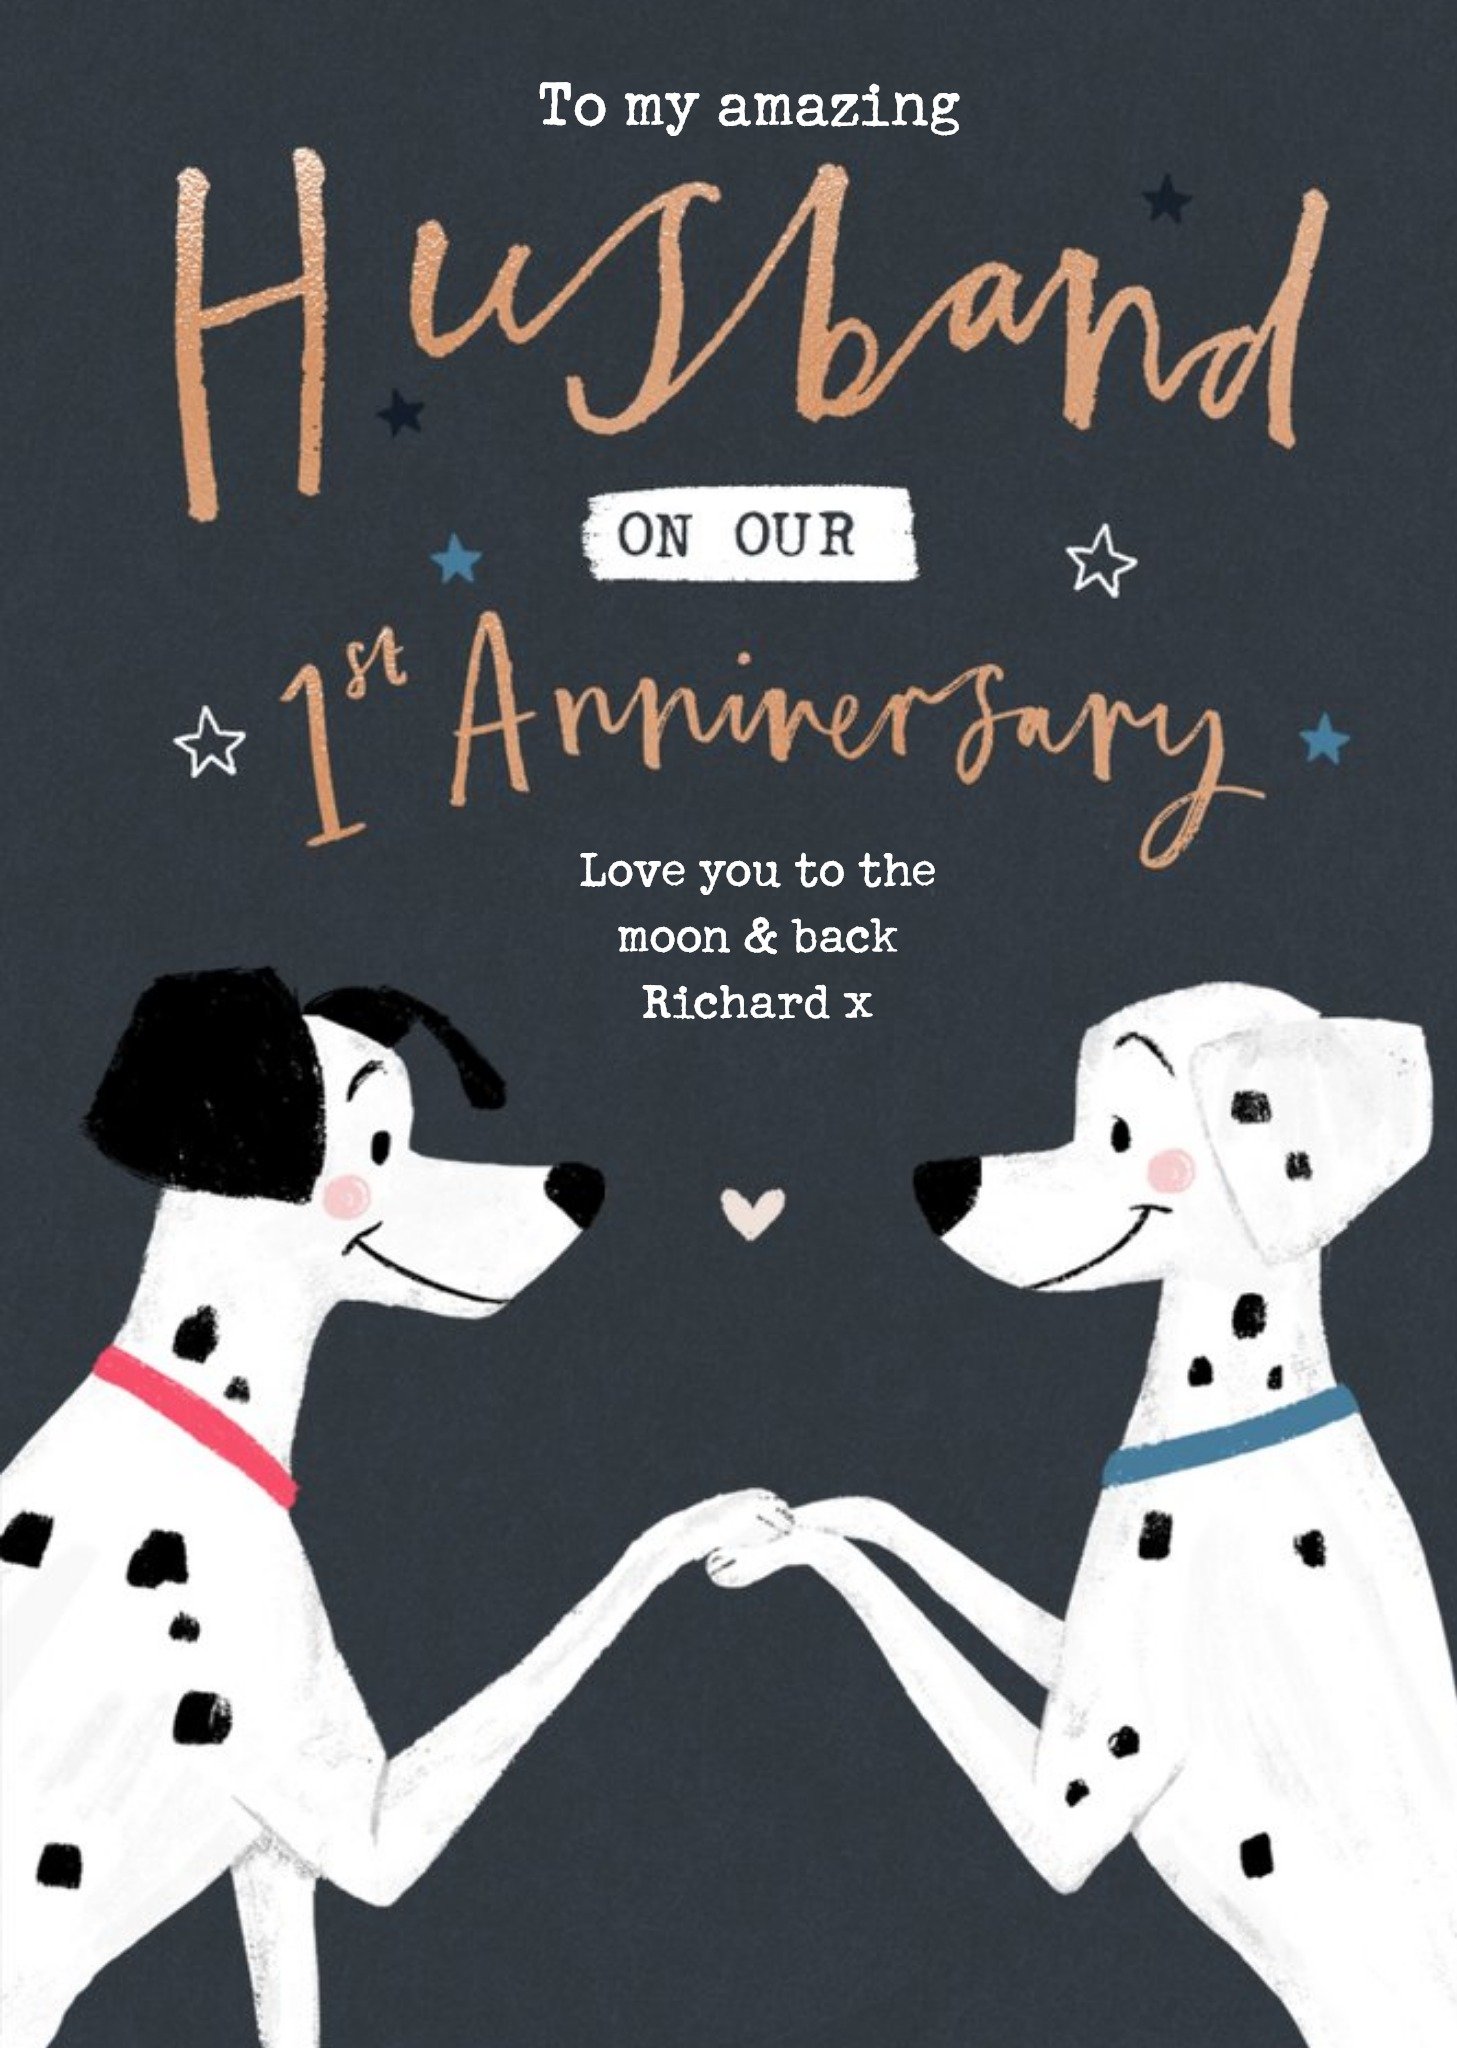 Disney 101 Dalmatians 1st Anniversary Card For Husband - Love You To The Moon And Back Ecard